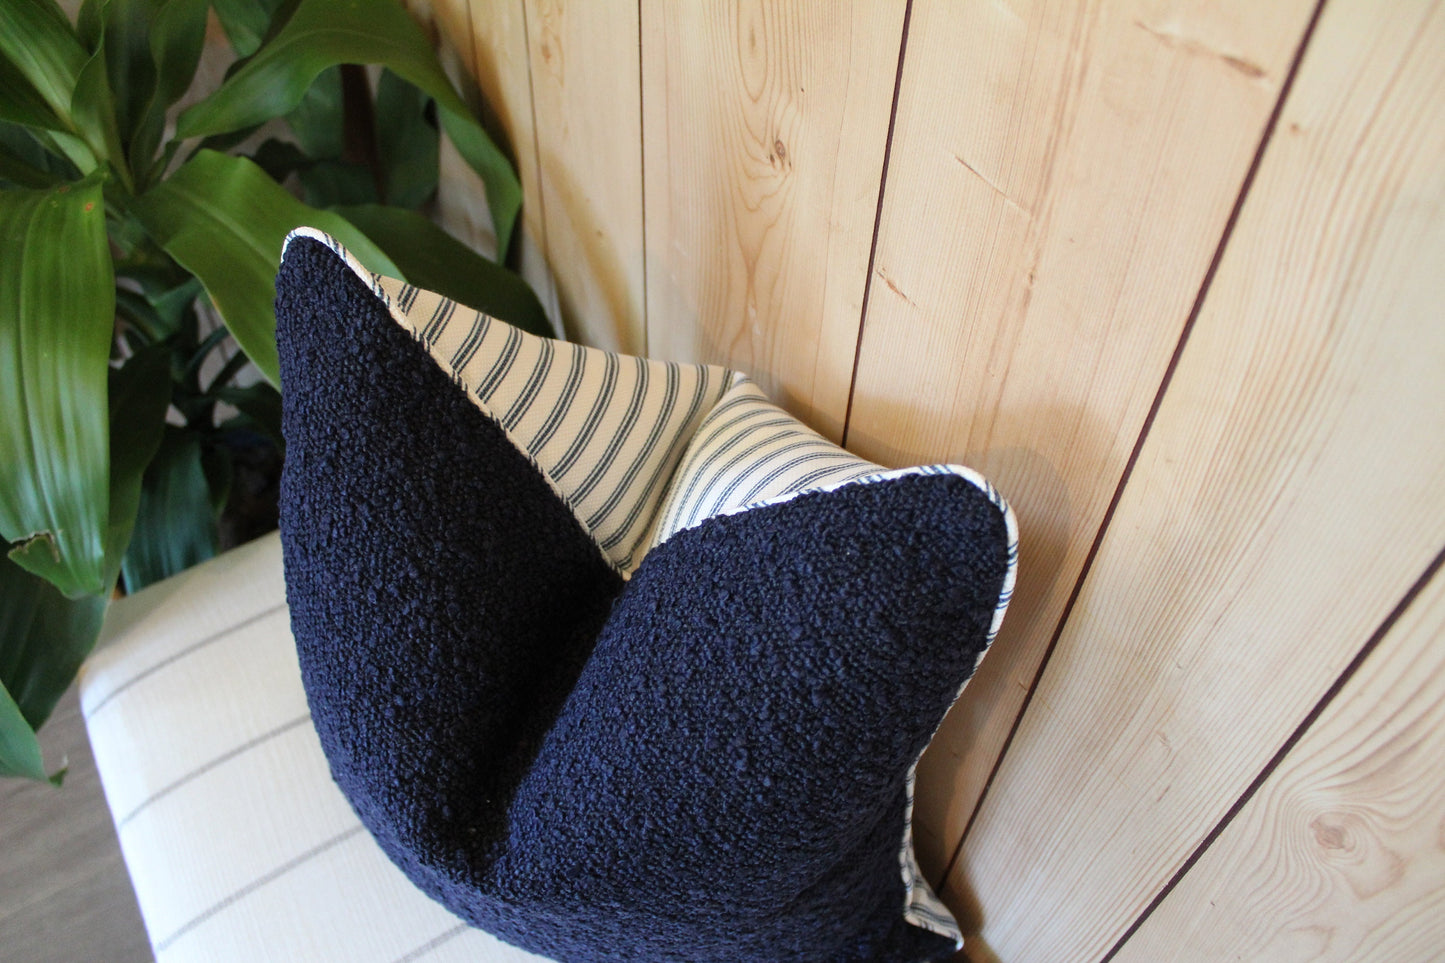 Ovis Ticking Cushion covers